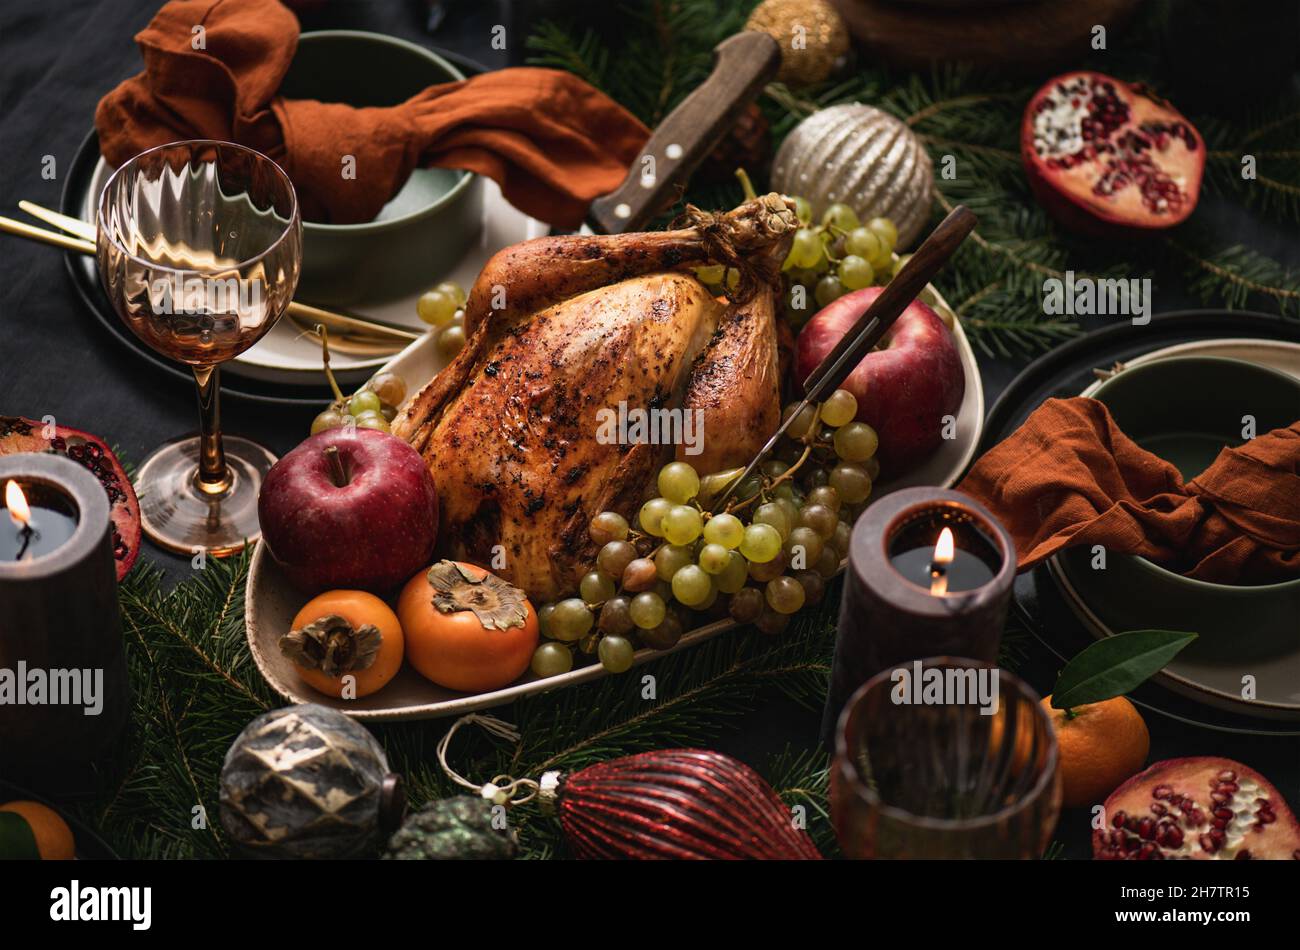 Festive dinner with whole roasted chicken and decorations Stock Photo